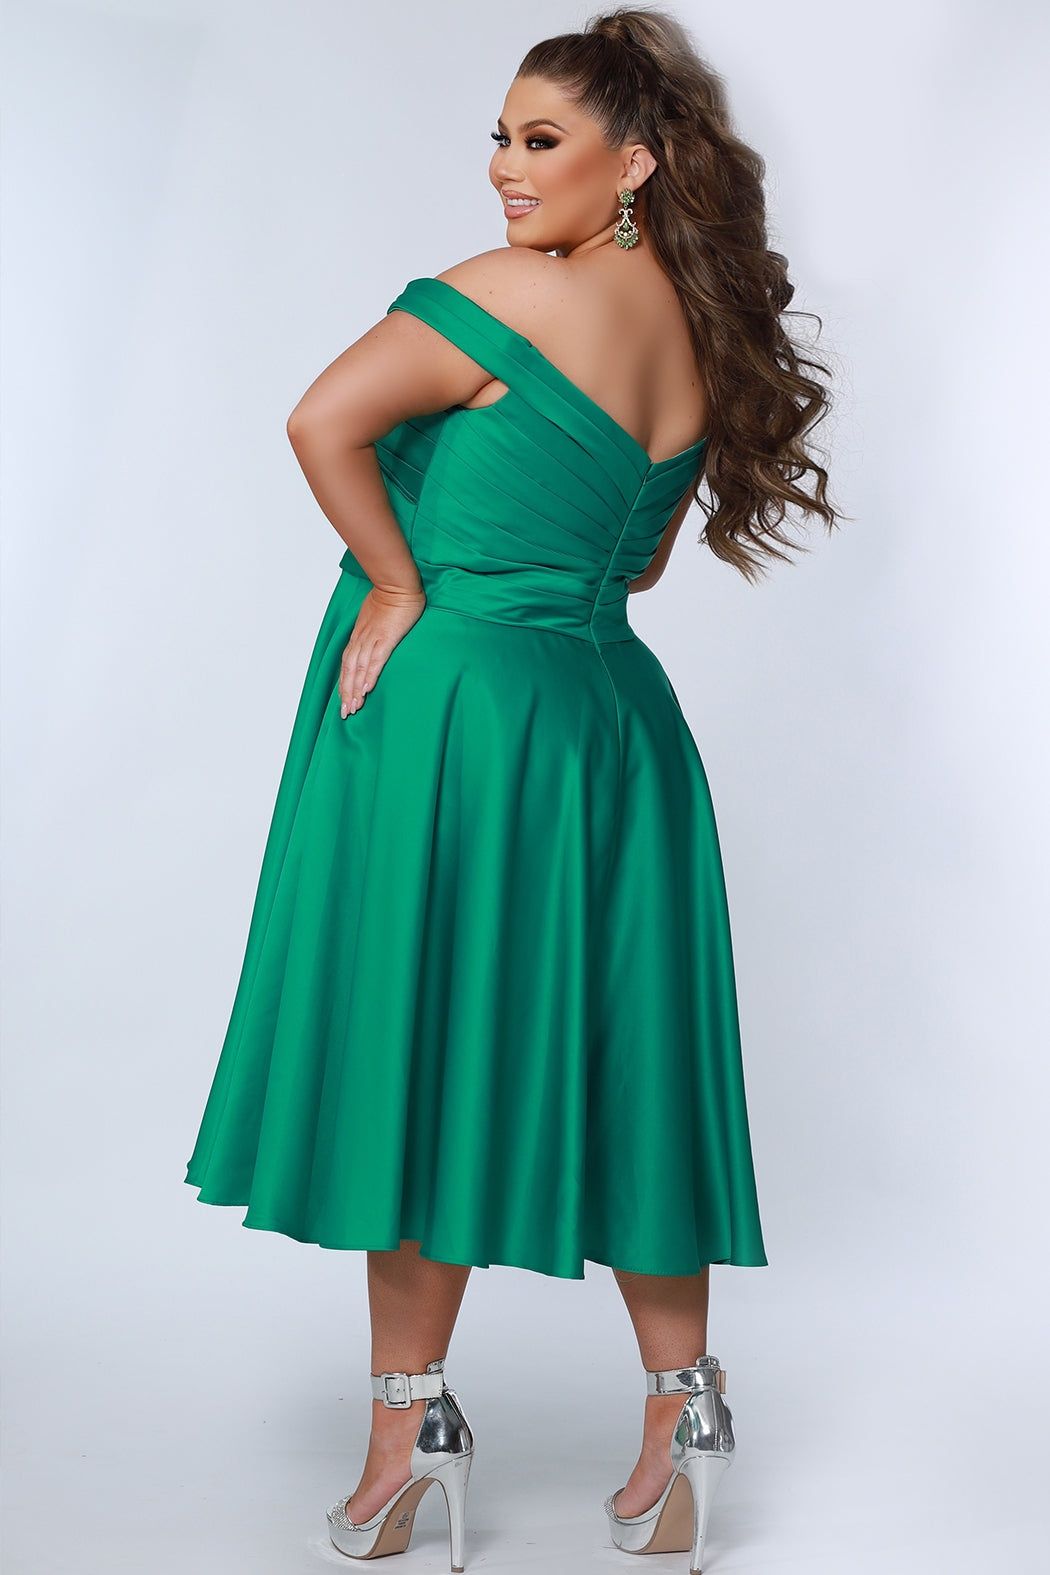 Style CE2301 Sydney's Closet Plus Size 28 Satin Emerald Black Cocktail Dress on Queenly